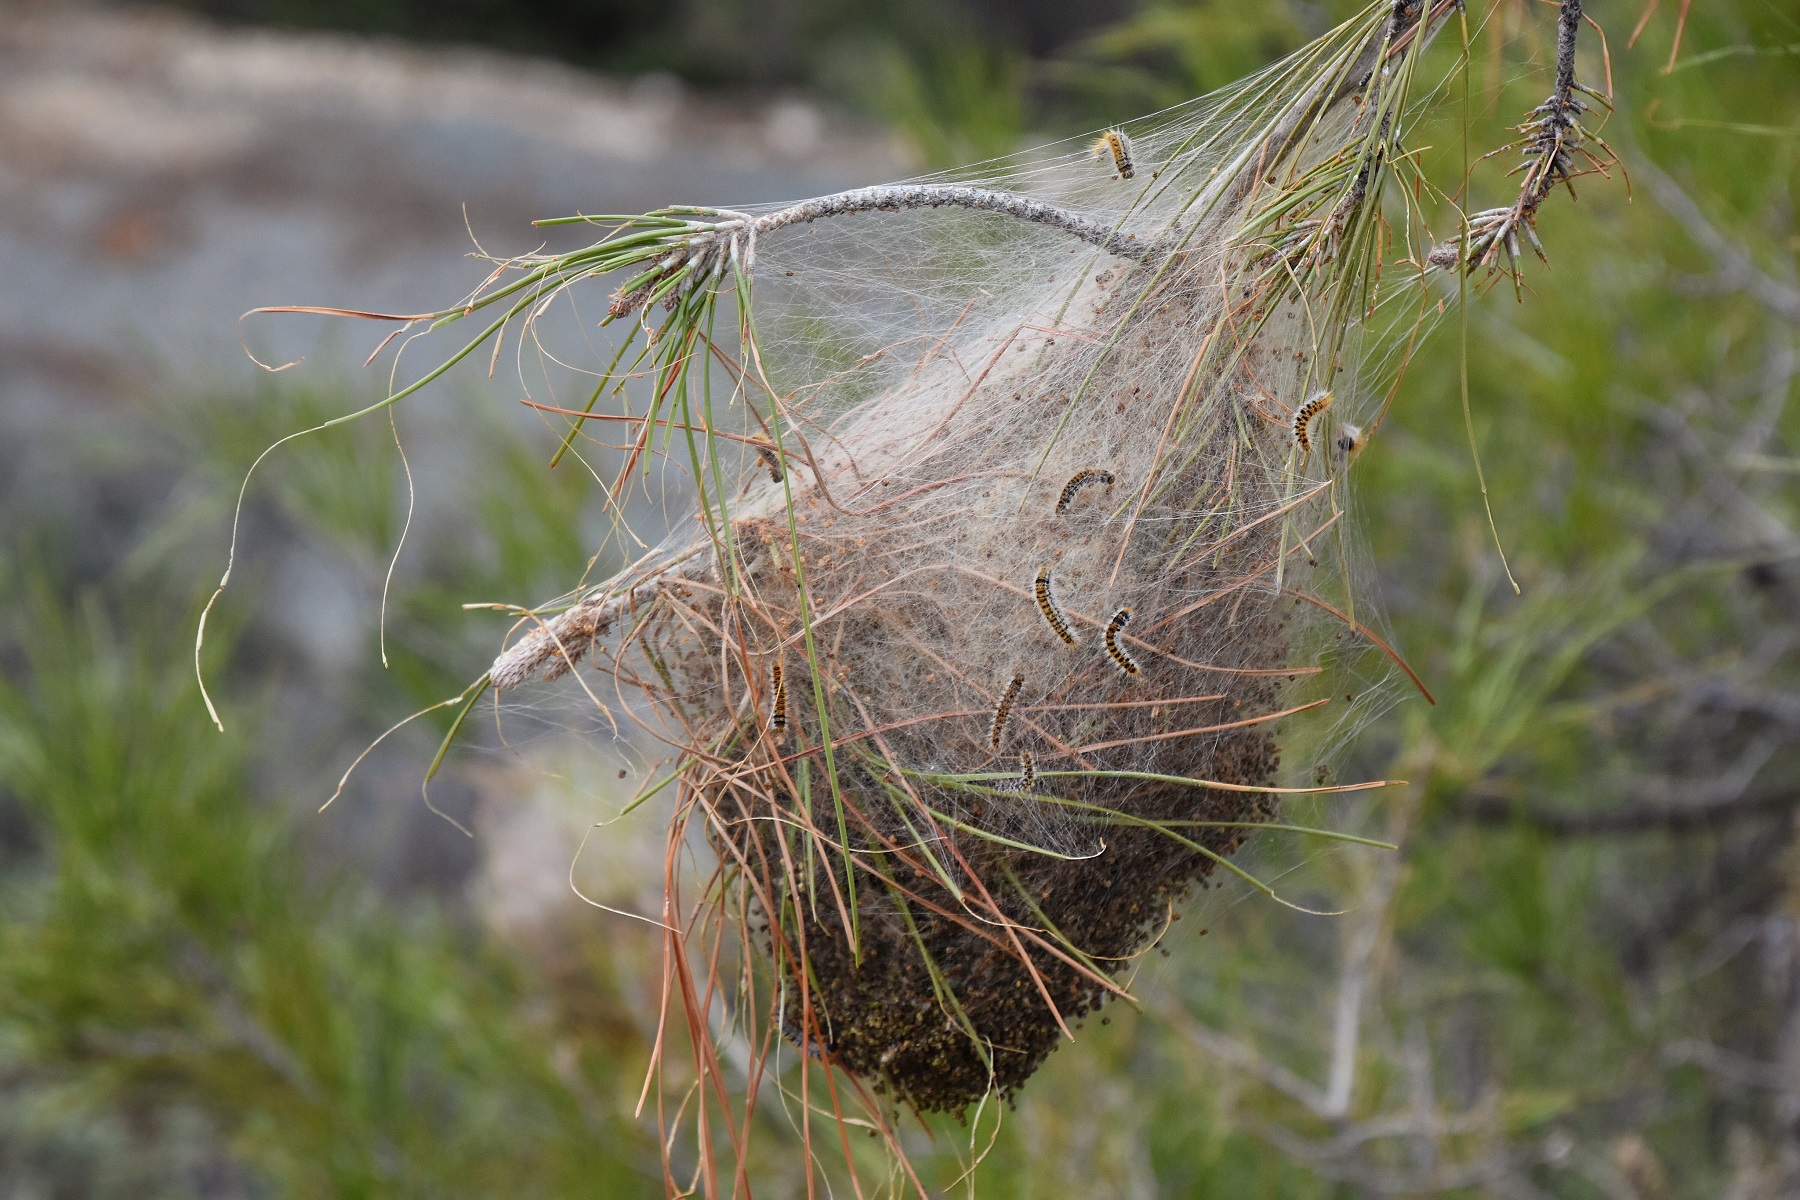 A nest. Pine-needle poo collects at the bottom